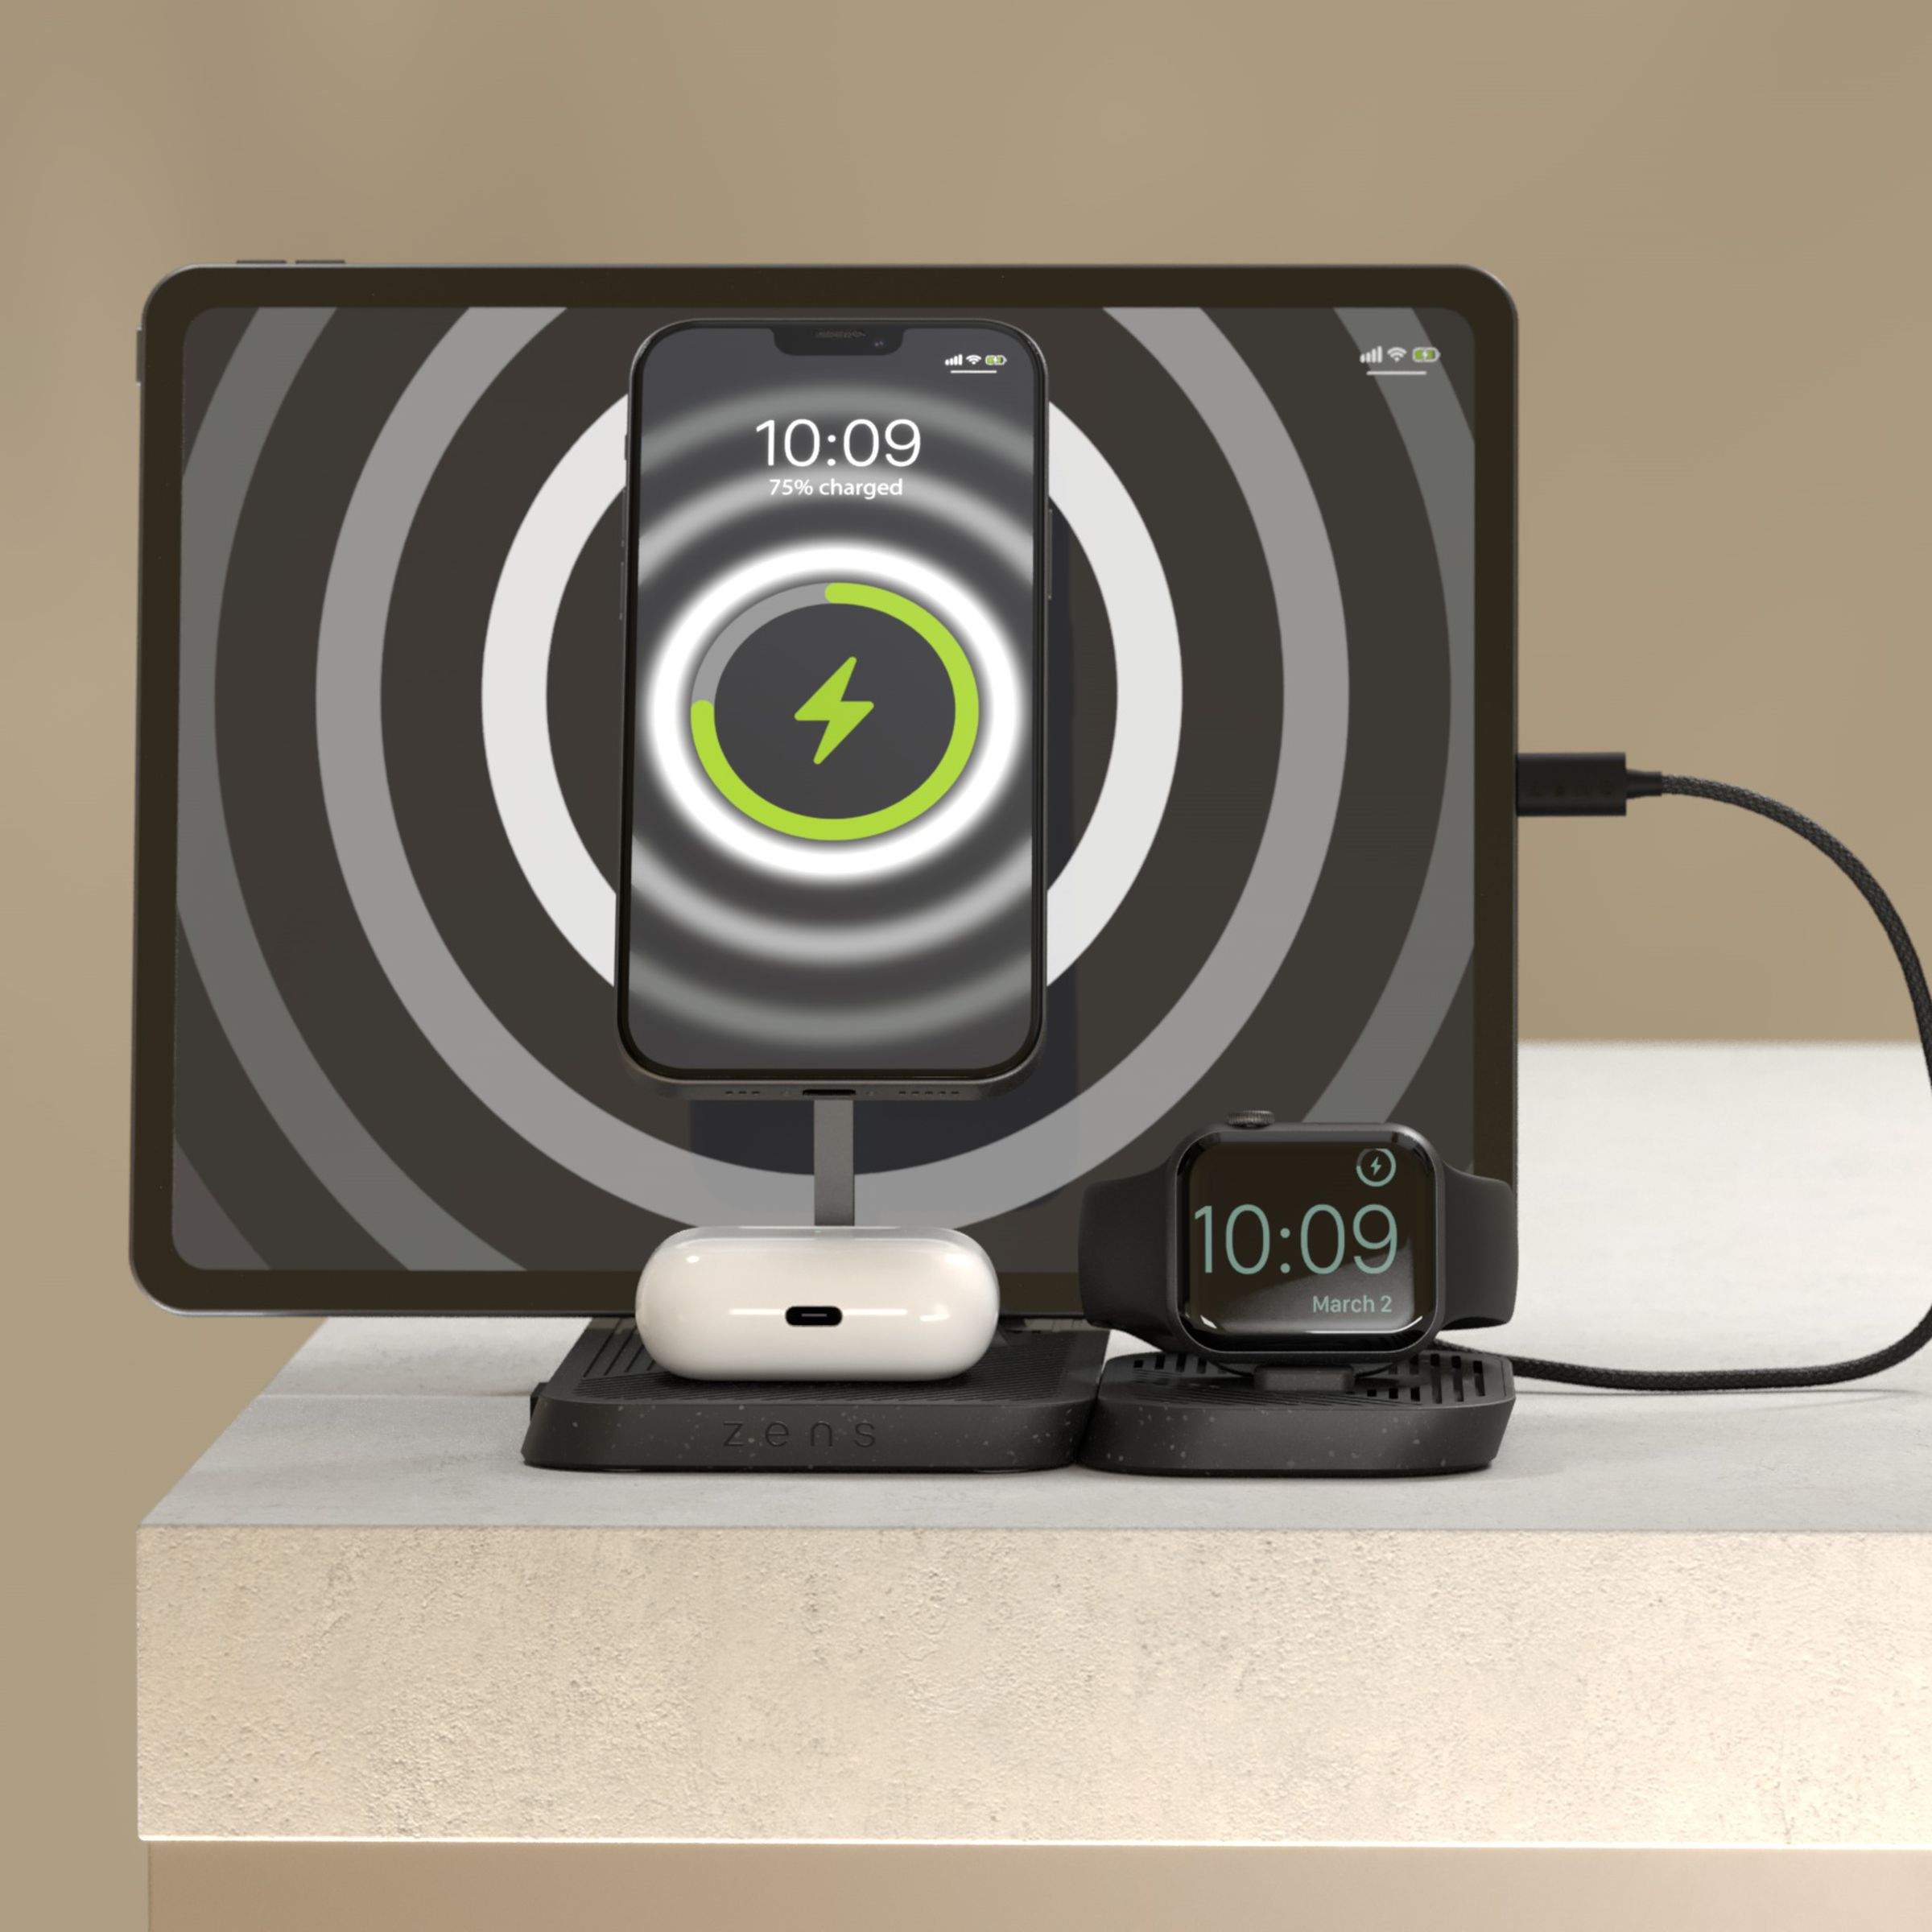 The Zens 4-in-1 multicharger on a table, wirelessly charging a MagSafe iPhone, Apple Watch, AirPods case, and wired USB-C iPad simultaneously.